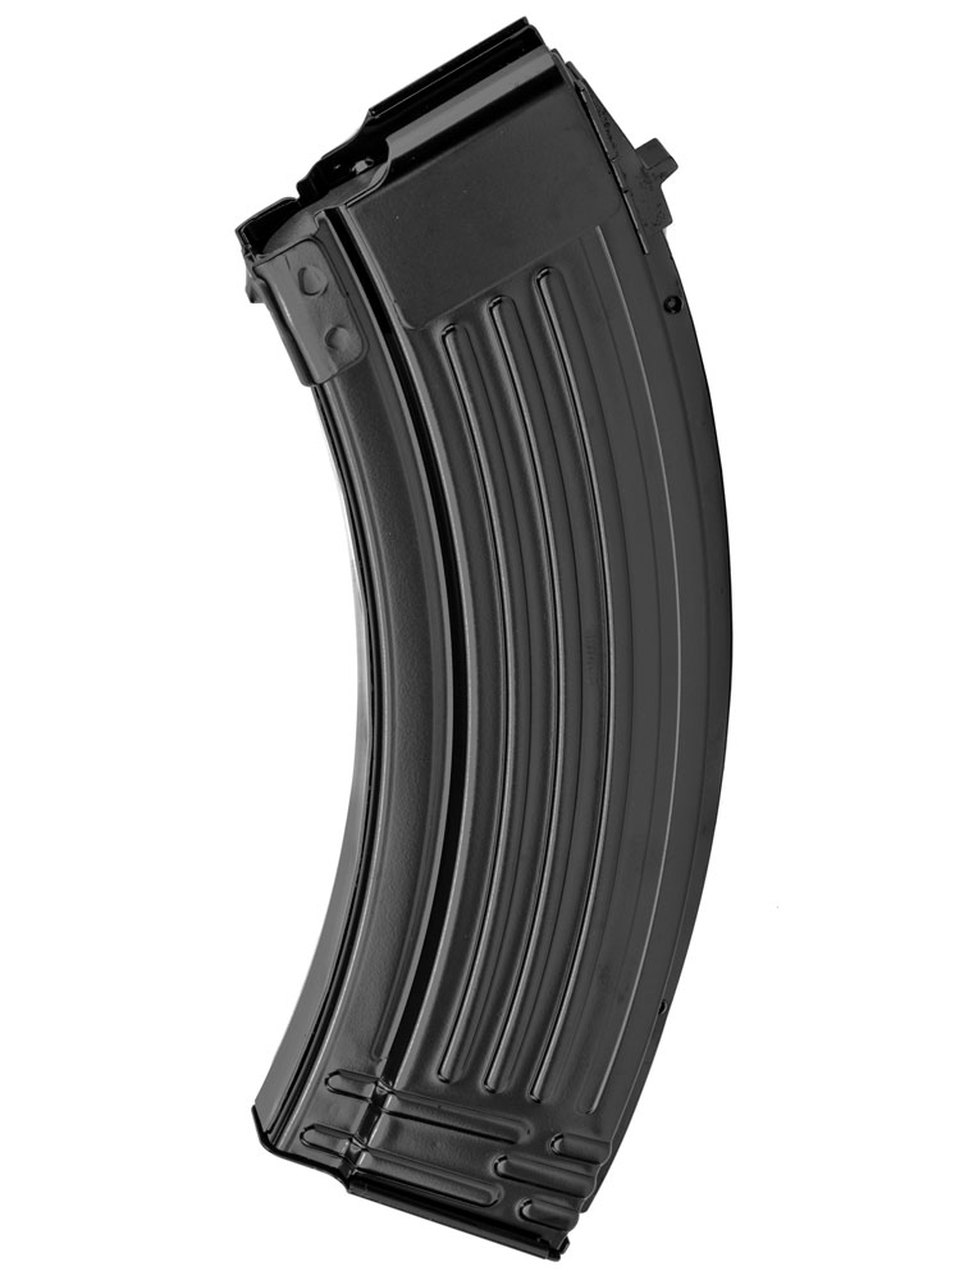 Steel AK-47 magazines hold 30 rounds. 